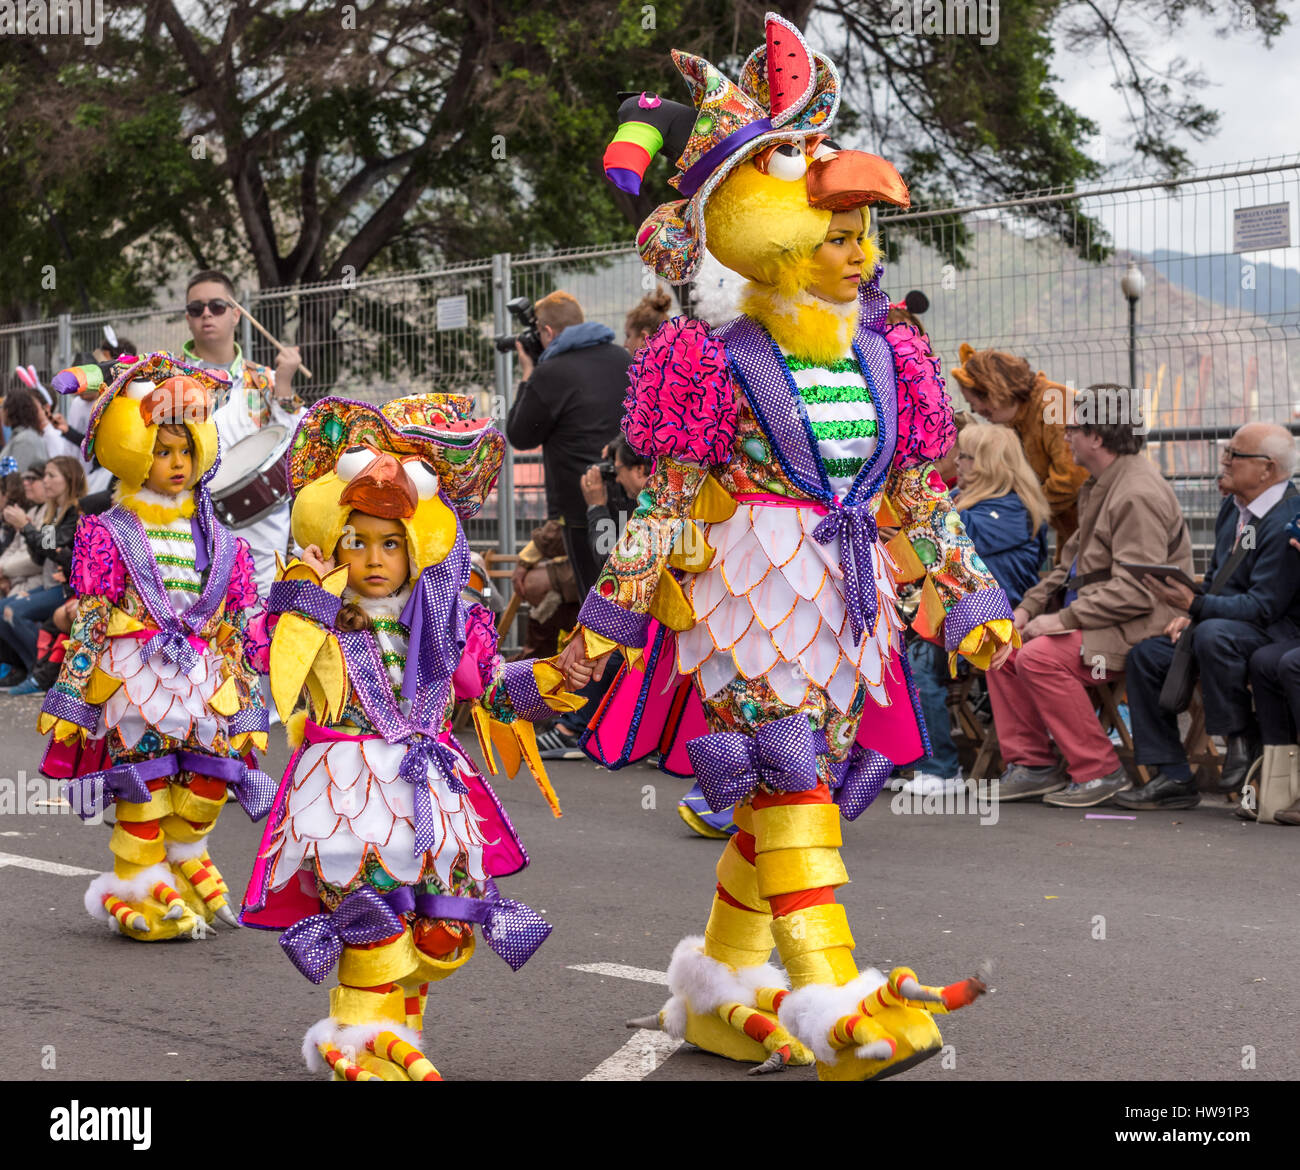 Young children in elaborate fancy dress in the Tenerife Carnival parade  Stock Photo - Alamy